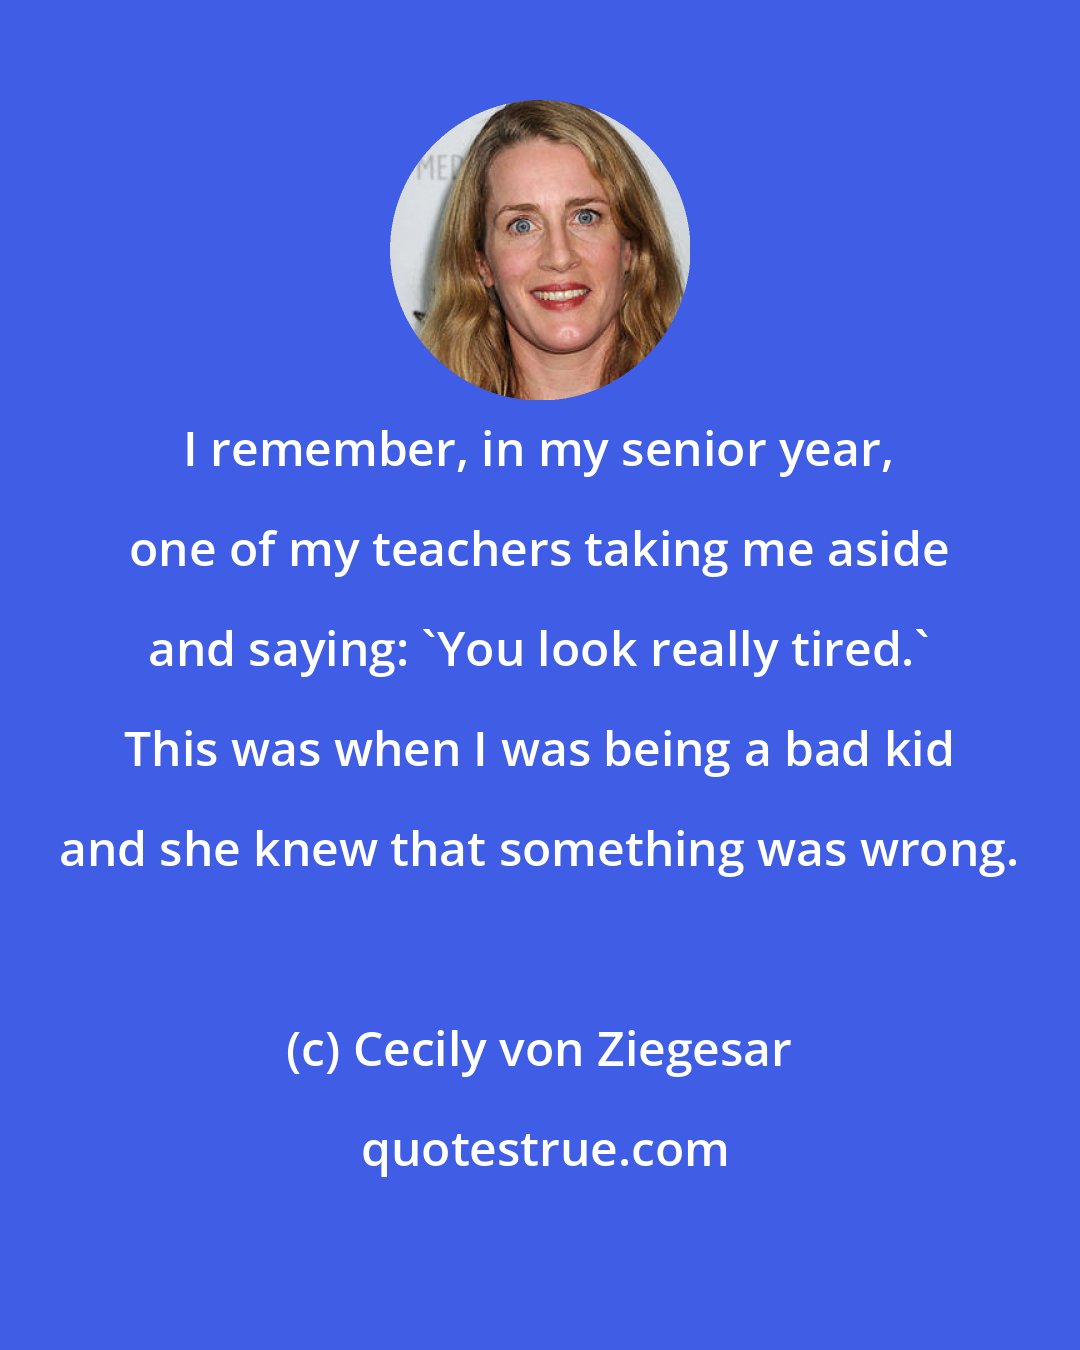 Cecily von Ziegesar: I remember, in my senior year, one of my teachers taking me aside and saying: 'You look really tired.' This was when I was being a bad kid and she knew that something was wrong.